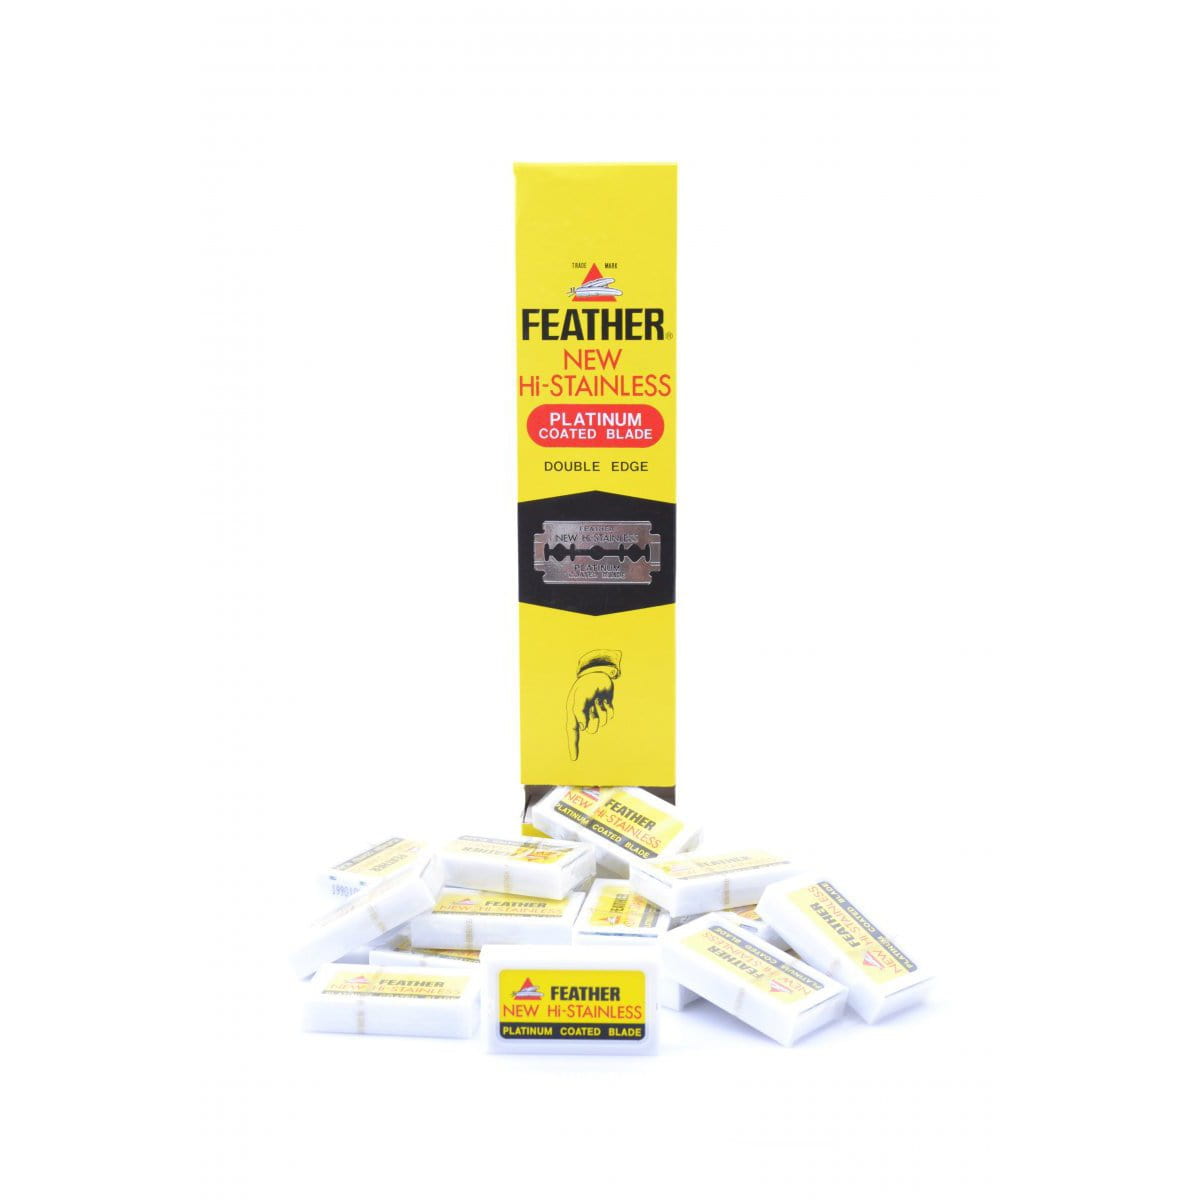 FEATHER DOBBELTBARBERBLAD 10-PACK (20 ST.)